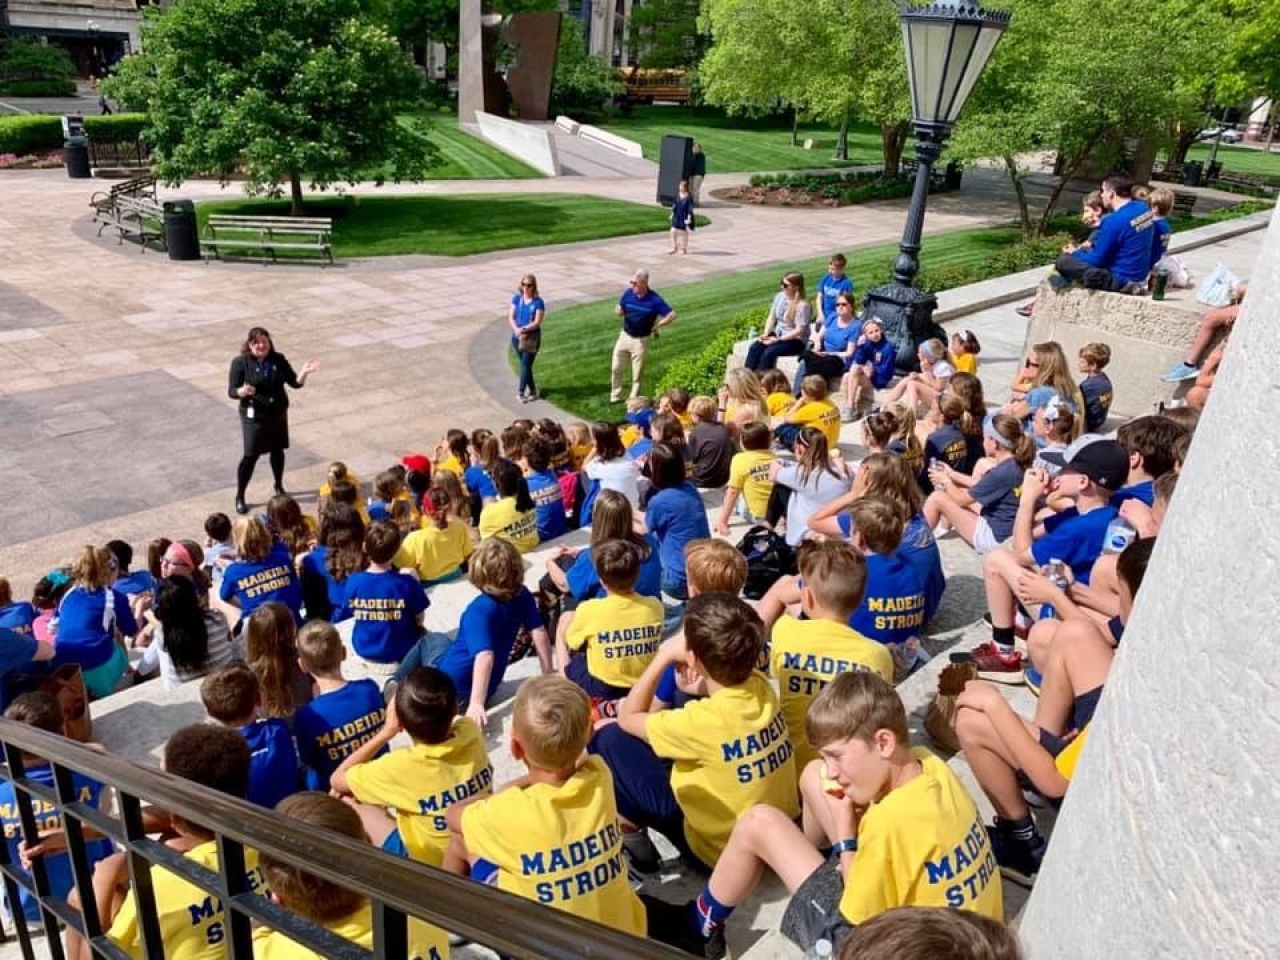 Speaking to Madeira 4th graders at the Statehouse in 2019